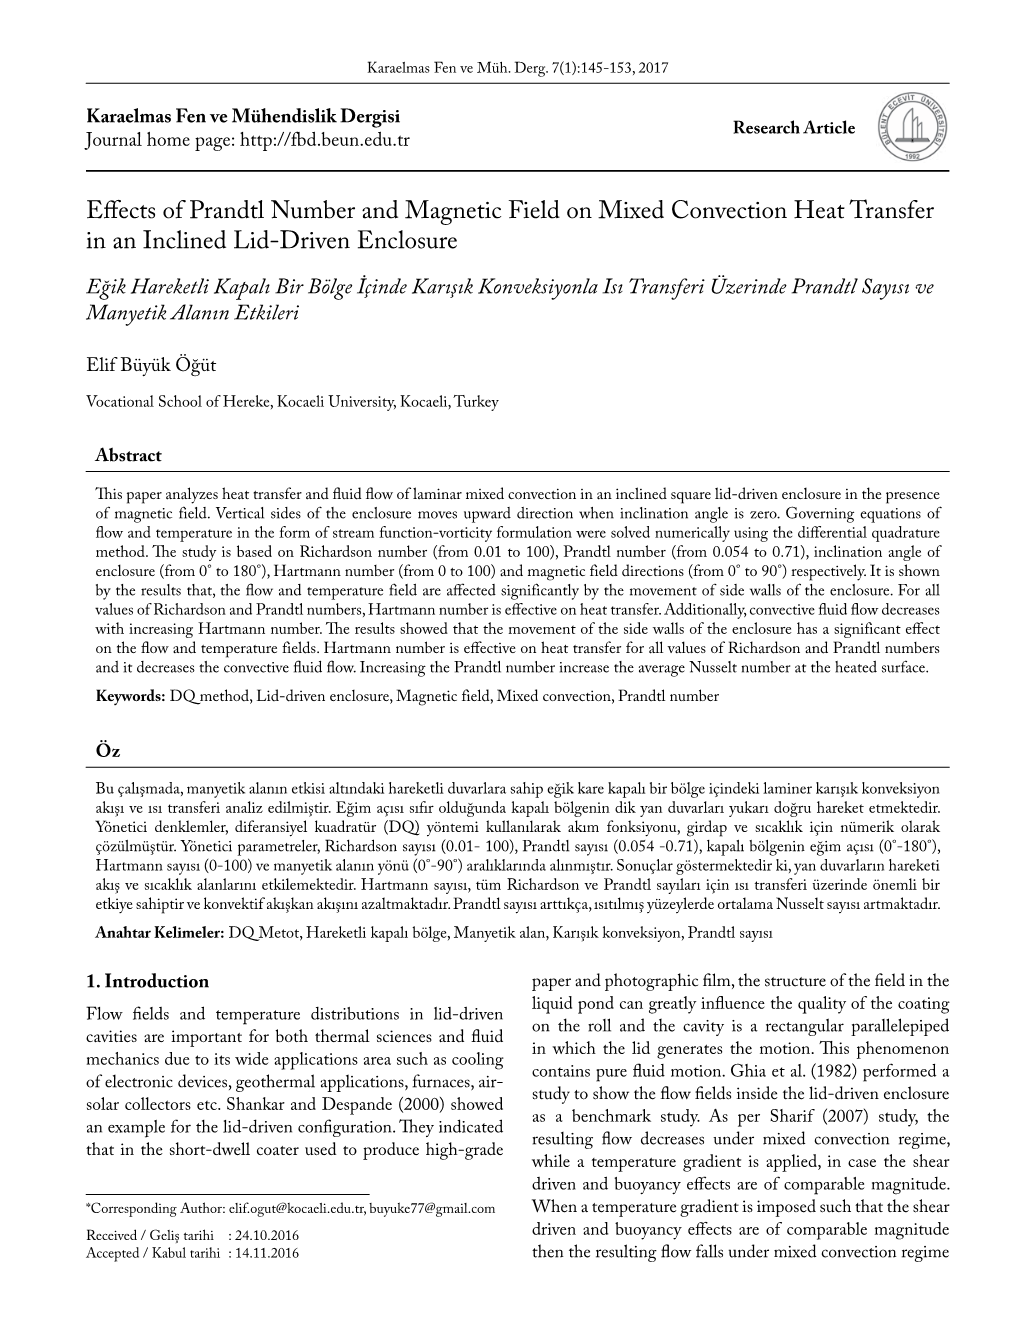 Effects of Prandtl Number and Magnetic Field on Mixed